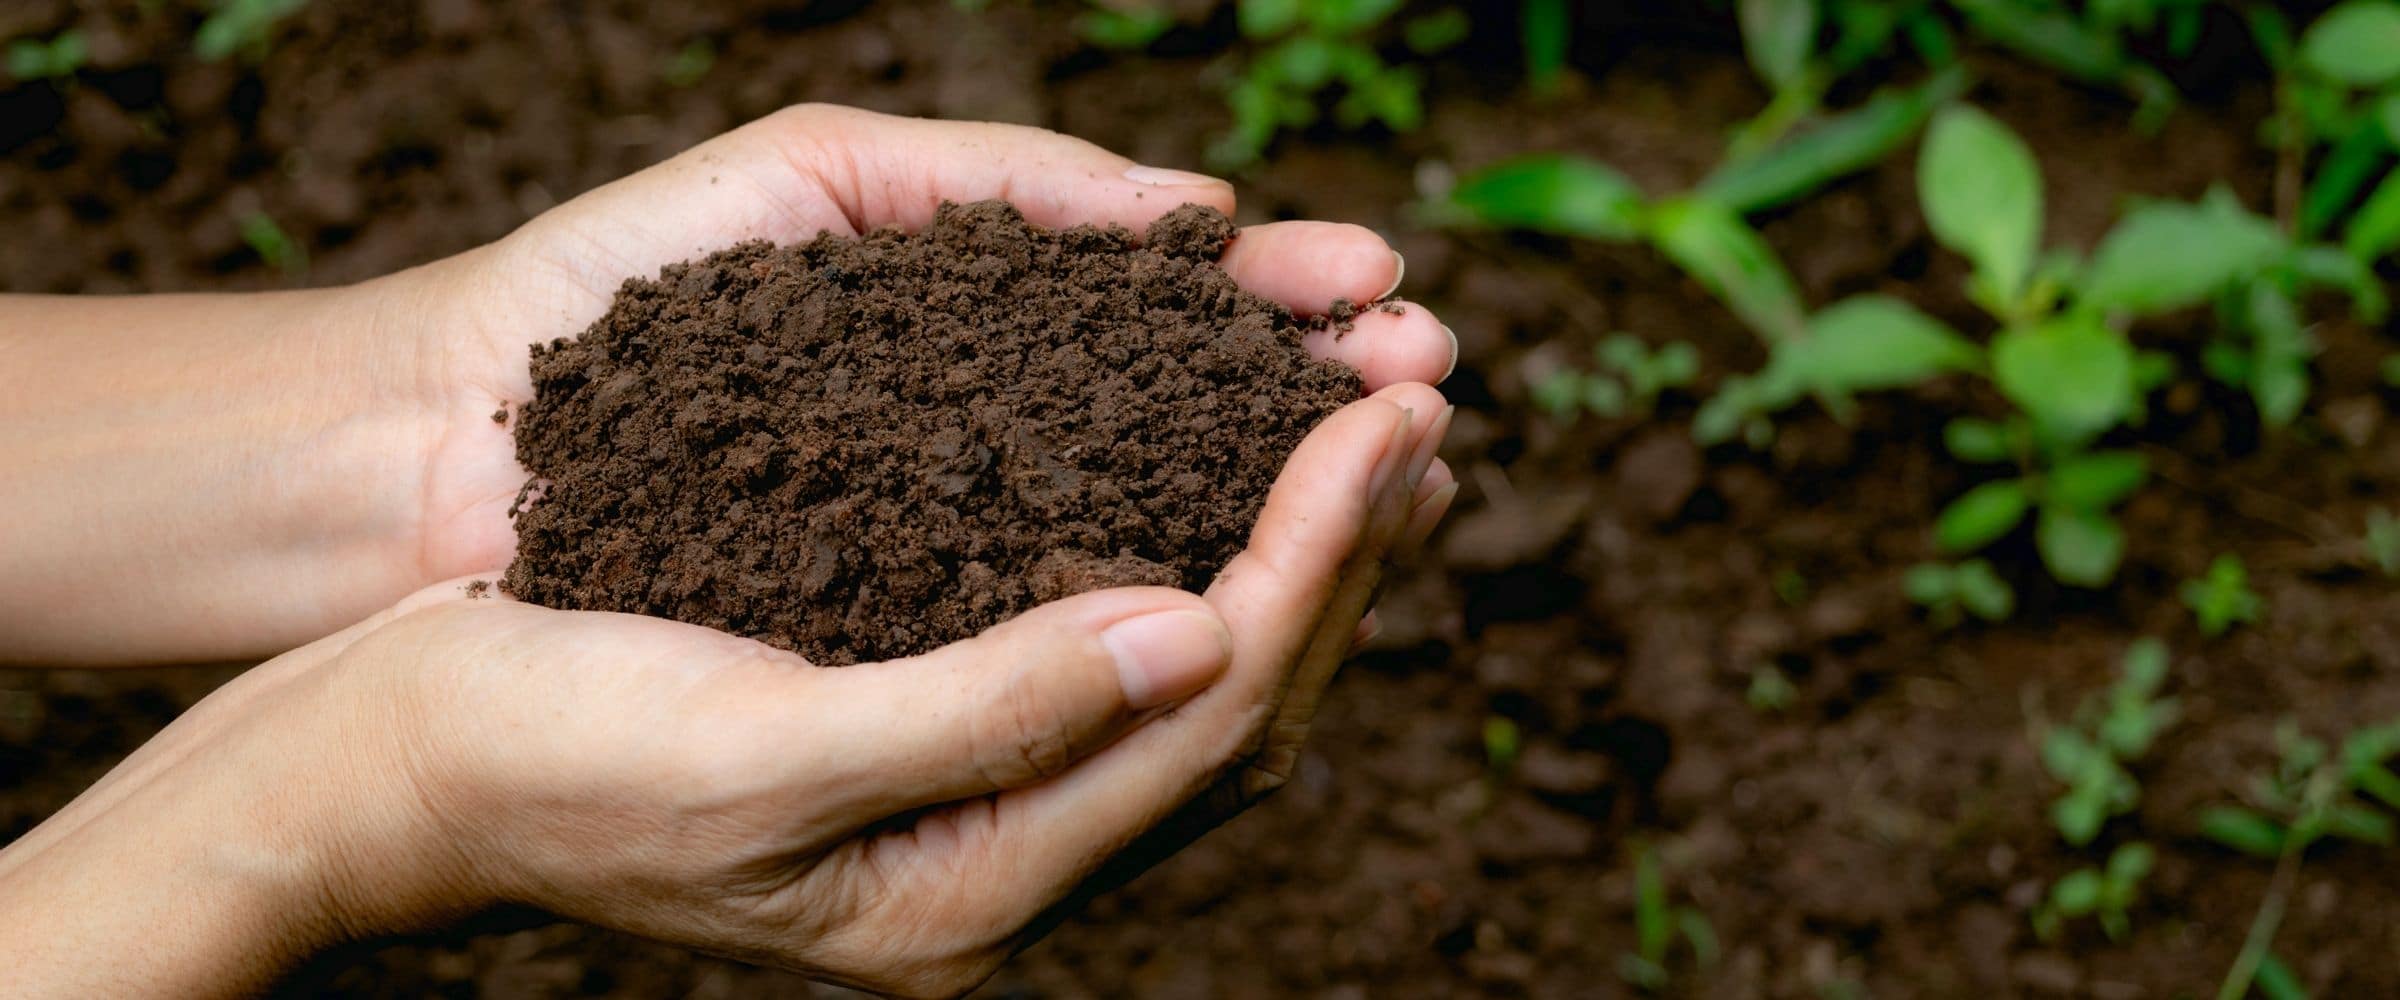 Hands holing dark soil with green leaves in the background.